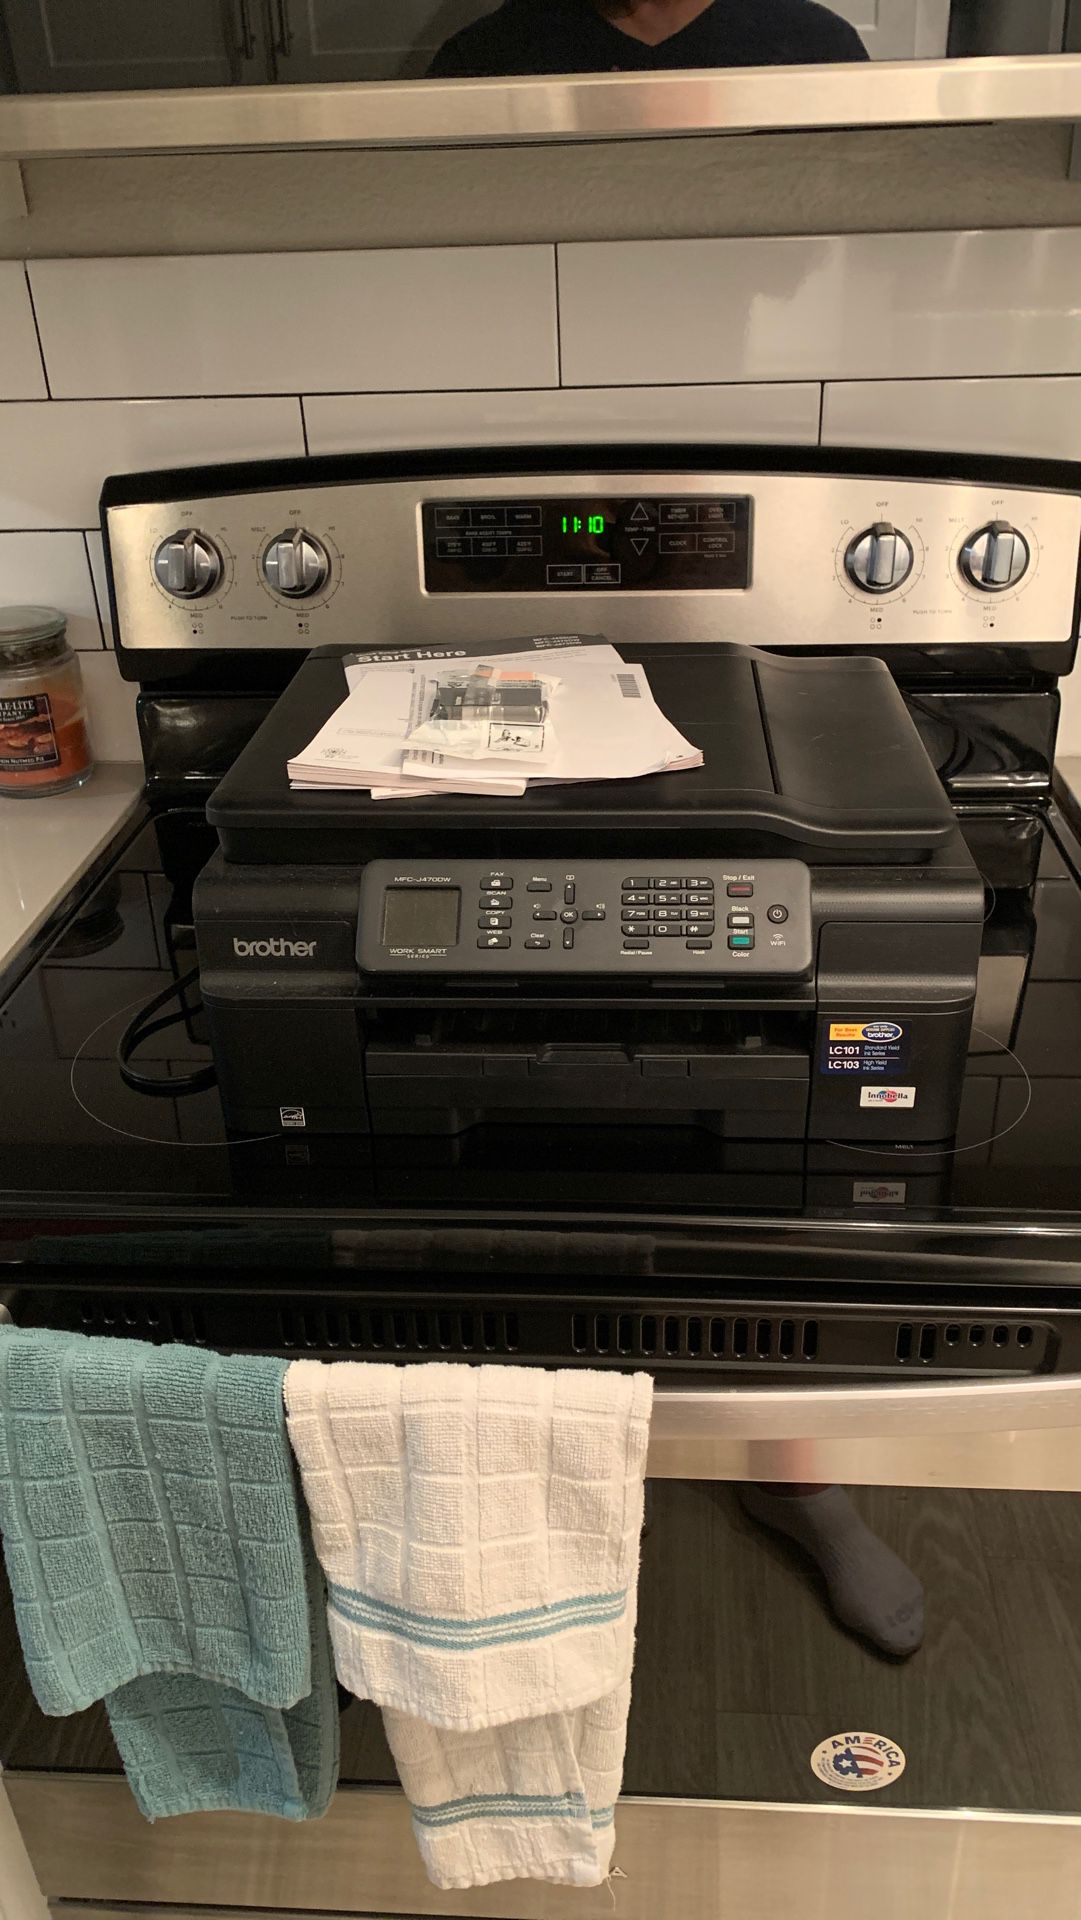 Brother (All in one) printer, scanner, and fax. Make an offer and we can see. 😀